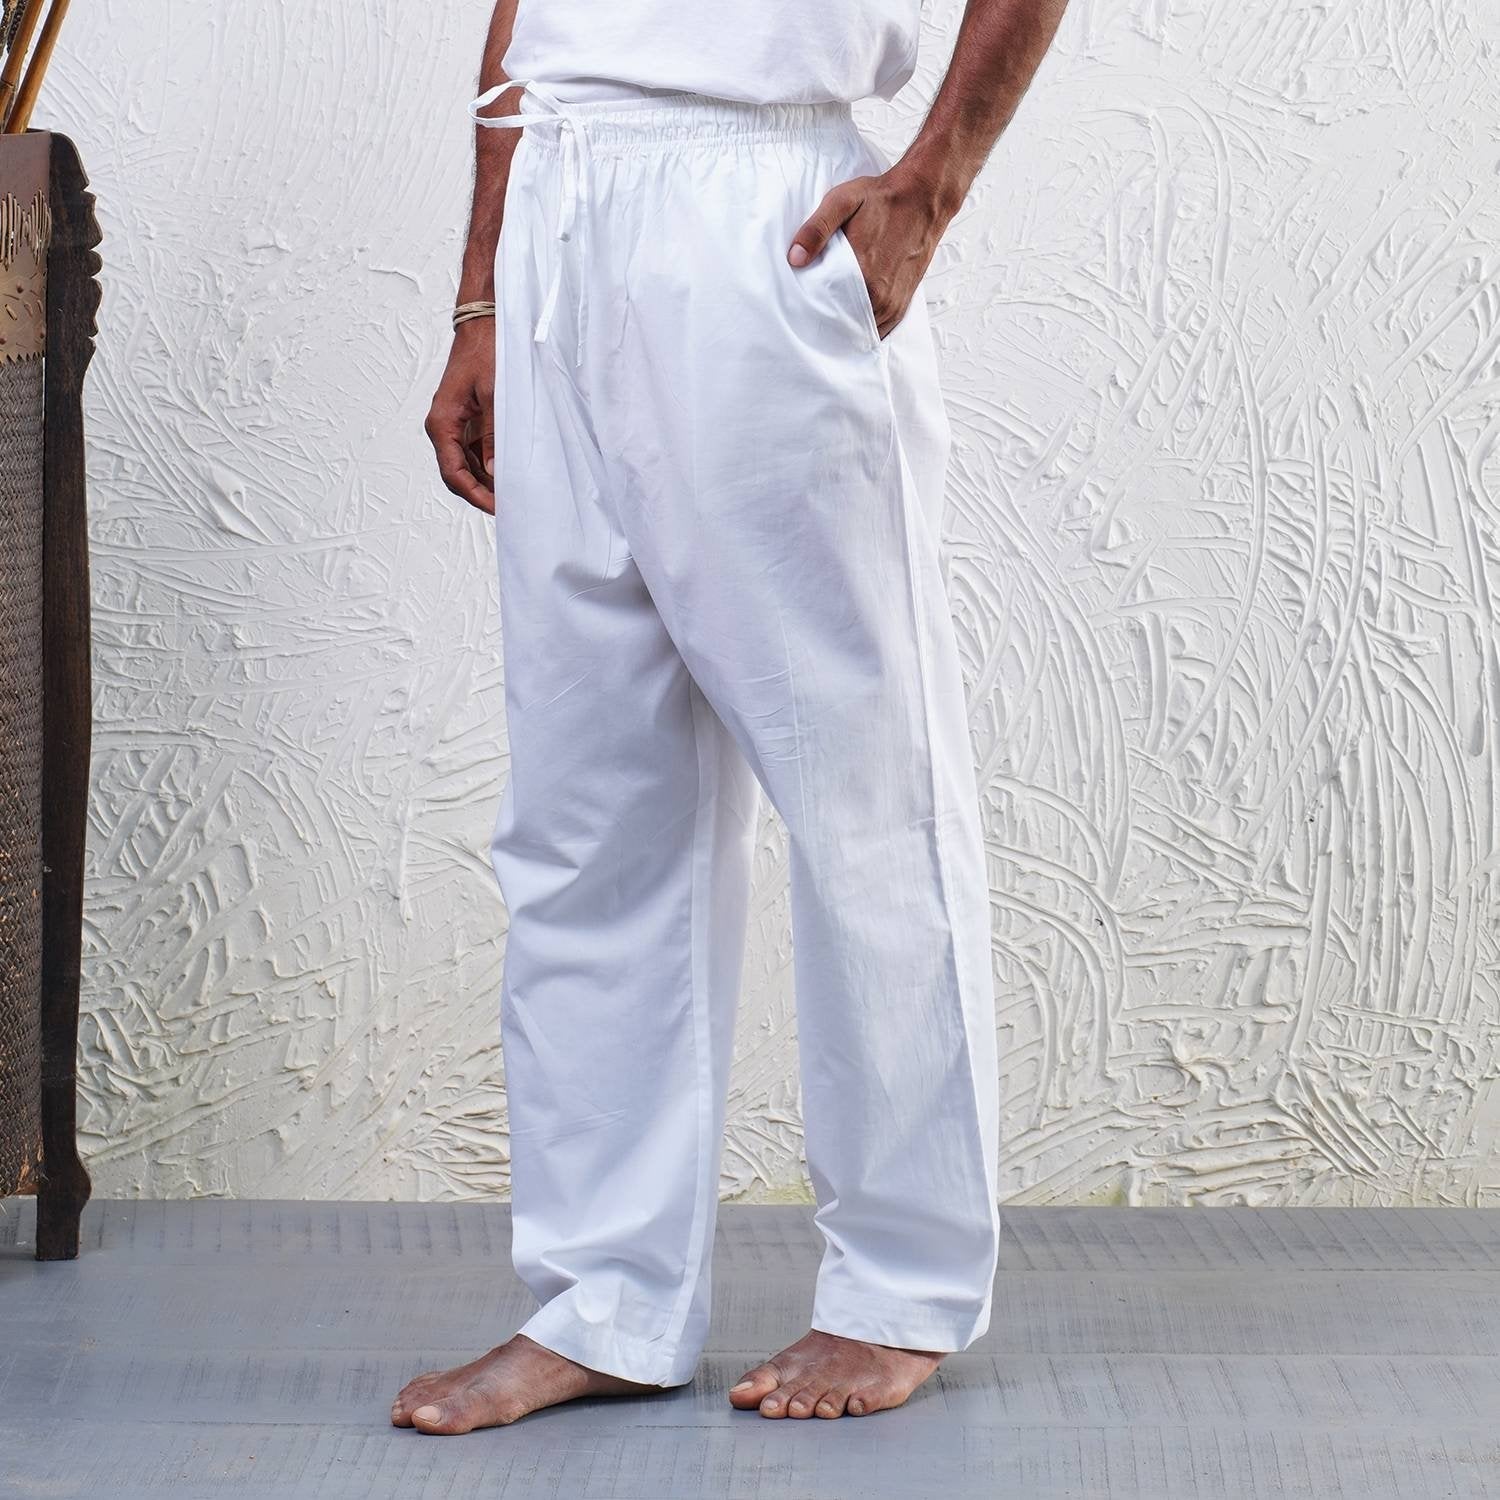 Dhoti Pants 101: A Beginner's Guide To This Indian Fashion Trend - Blog |  Isha Life